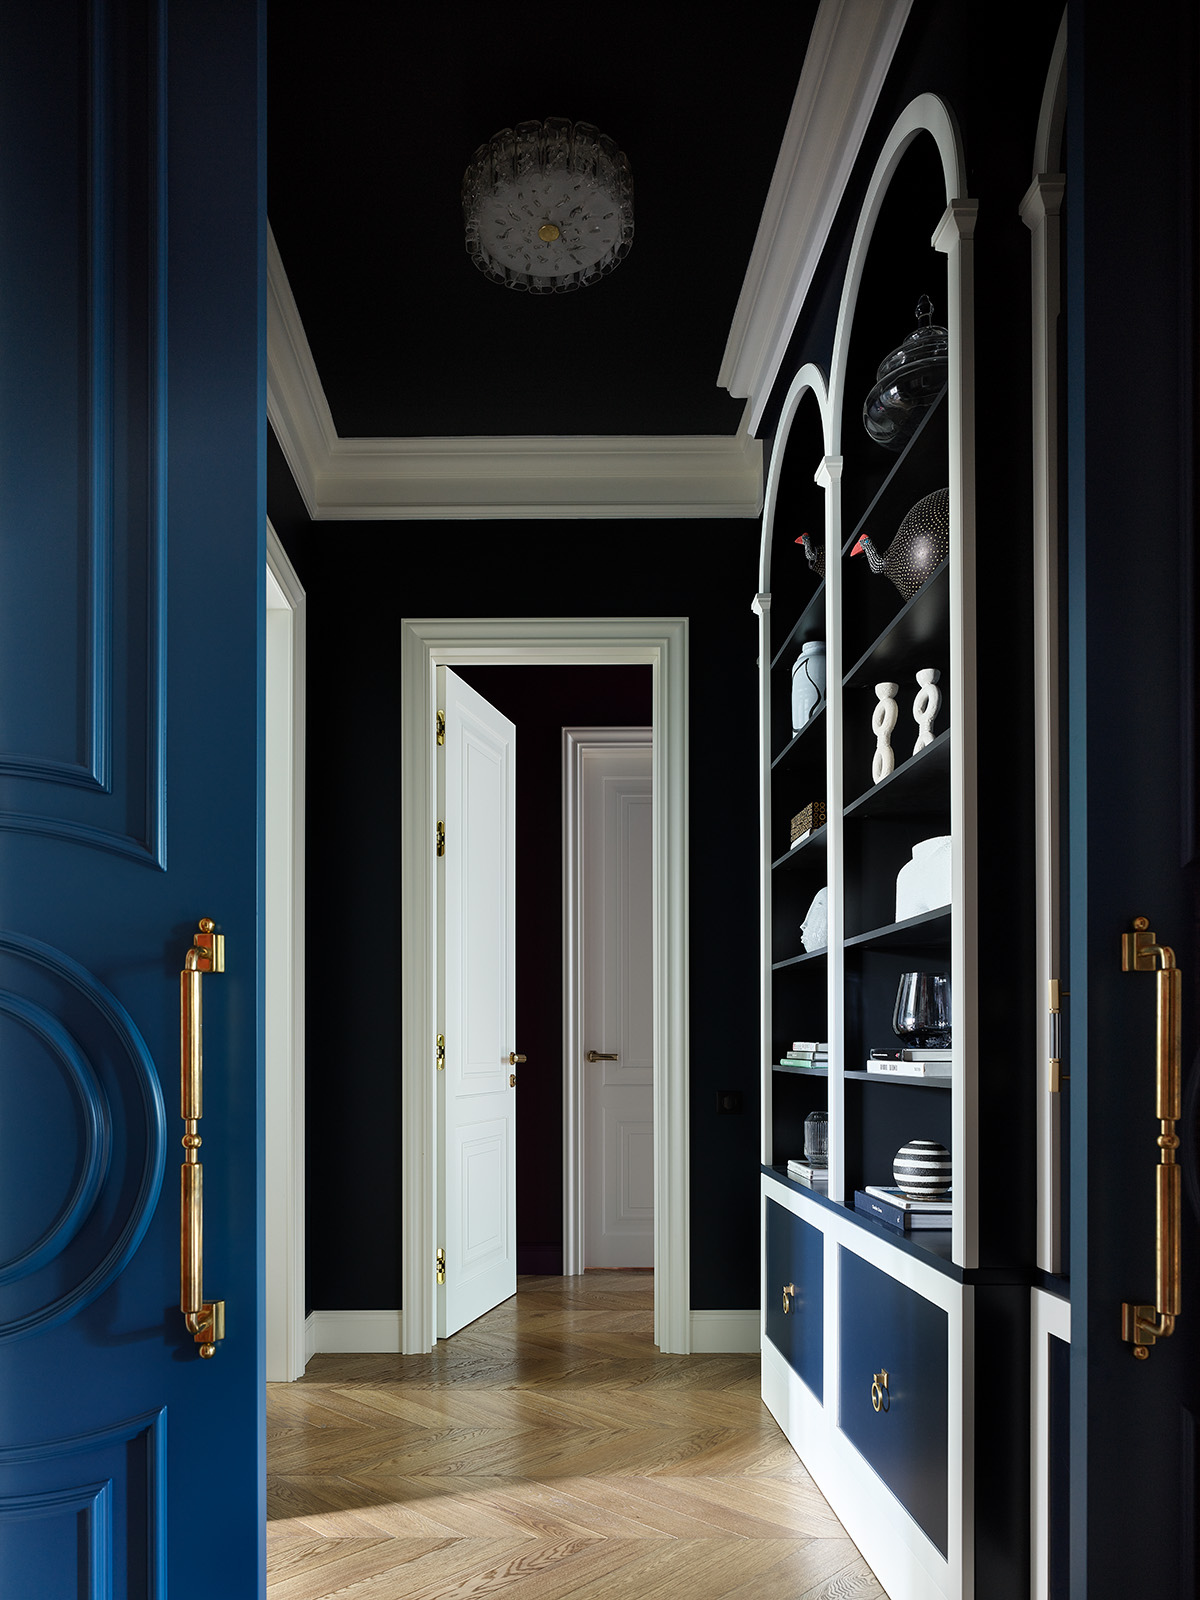 hallway with wooden floor, shelves and walls and doors painted in blue paint